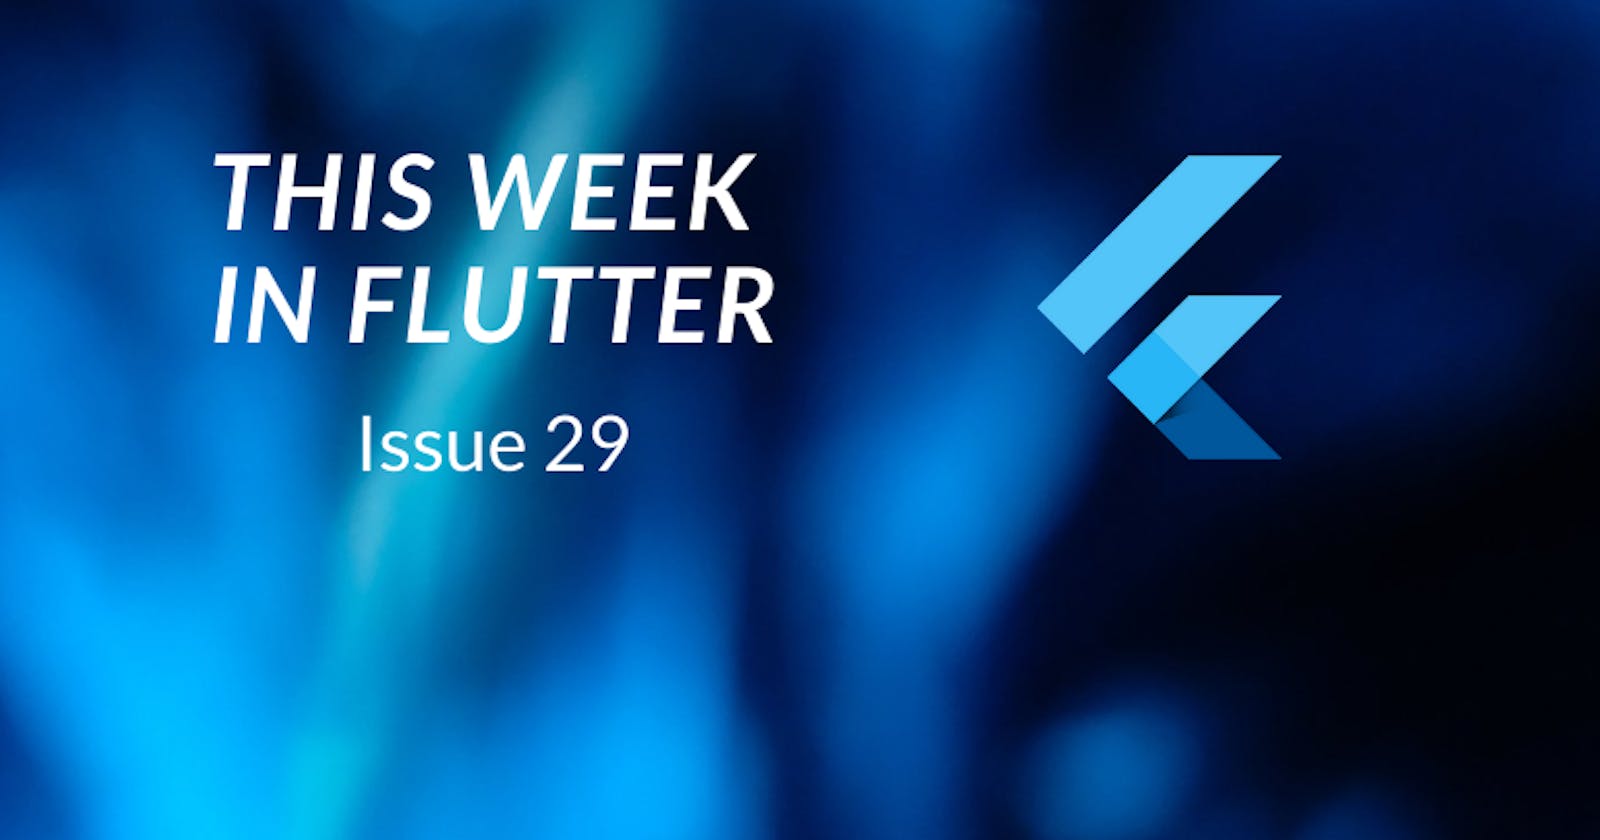 This week in Flutter #29